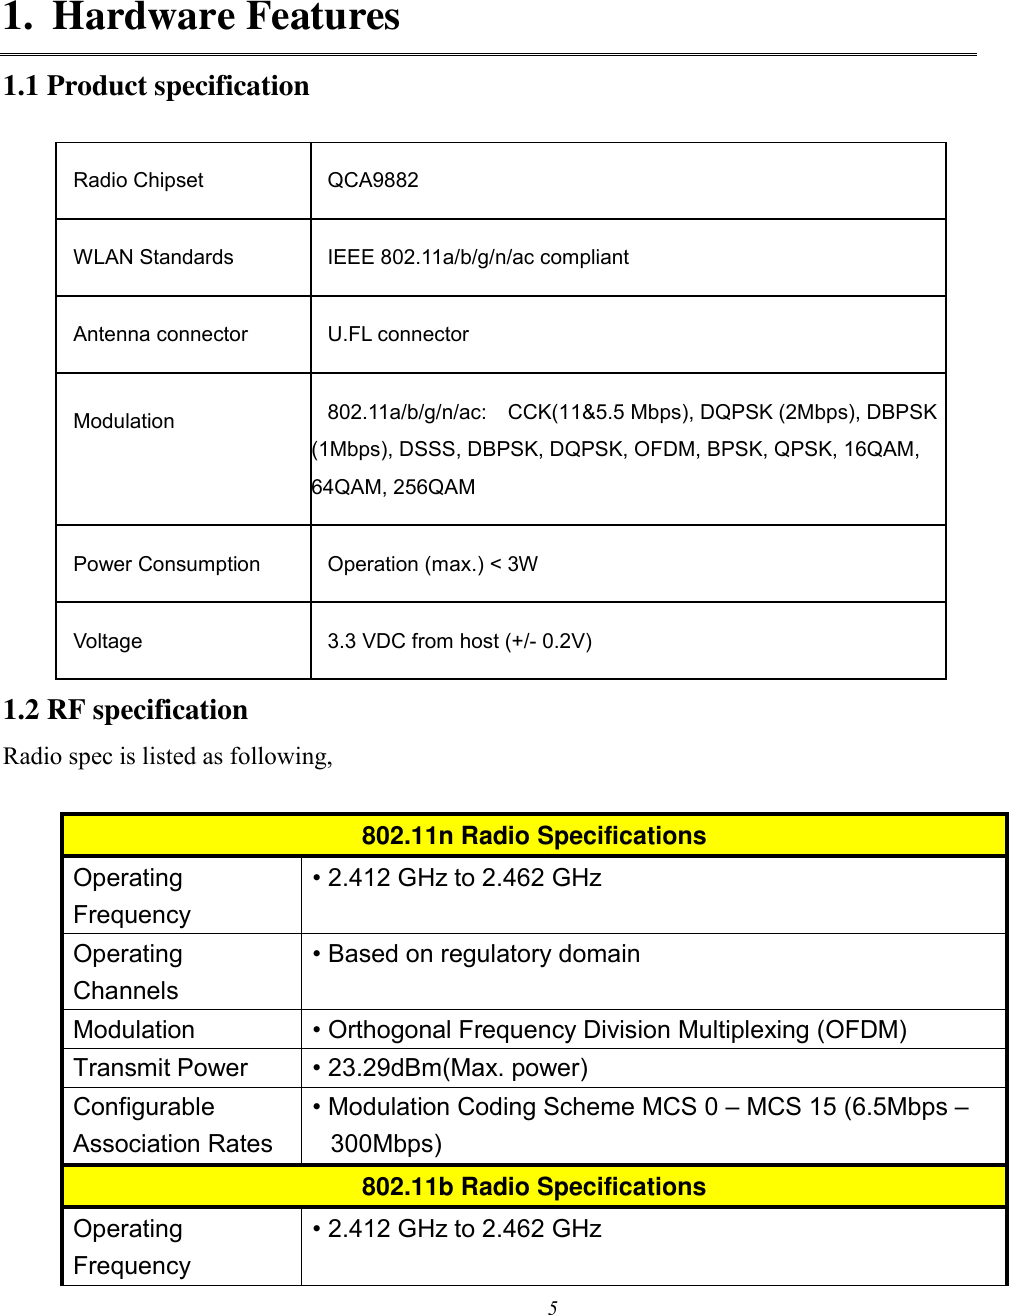 5   1. Hardware Features 1.1 Product specification 1.2 RF specification   Radio spec is listed as following,  802.11n Radio Specifications Operating Frequency • 2.412 GHz to 2.462 GHz Operating Channels • Based on regulatory domain Modulation • Orthogonal Frequency Division Multiplexing (OFDM) Transmit Power • 23.29dBm(Max. power) Configurable Association Rates • Modulation Coding Scheme MCS 0 – MCS 15 (6.5Mbps – 300Mbps) 802.11b Radio Specifications Operating Frequency • 2.412 GHz to 2.462 GHz Radio Chipset QCA9882 WLAN Standards IEEE 802.11a/b/g/n/ac compliant Antenna connector U.FL connector Modulation  802.11a/b/g/n/ac:    CCK(11&amp;5.5 Mbps), DQPSK (2Mbps), DBPSK (1Mbps), DSSS, DBPSK, DQPSK, OFDM, BPSK, QPSK, 16QAM, 64QAM, 256QAM Power Consumption Operation (max.) &lt; 3W   Voltage 3.3 VDC from host (+/- 0.2V) 